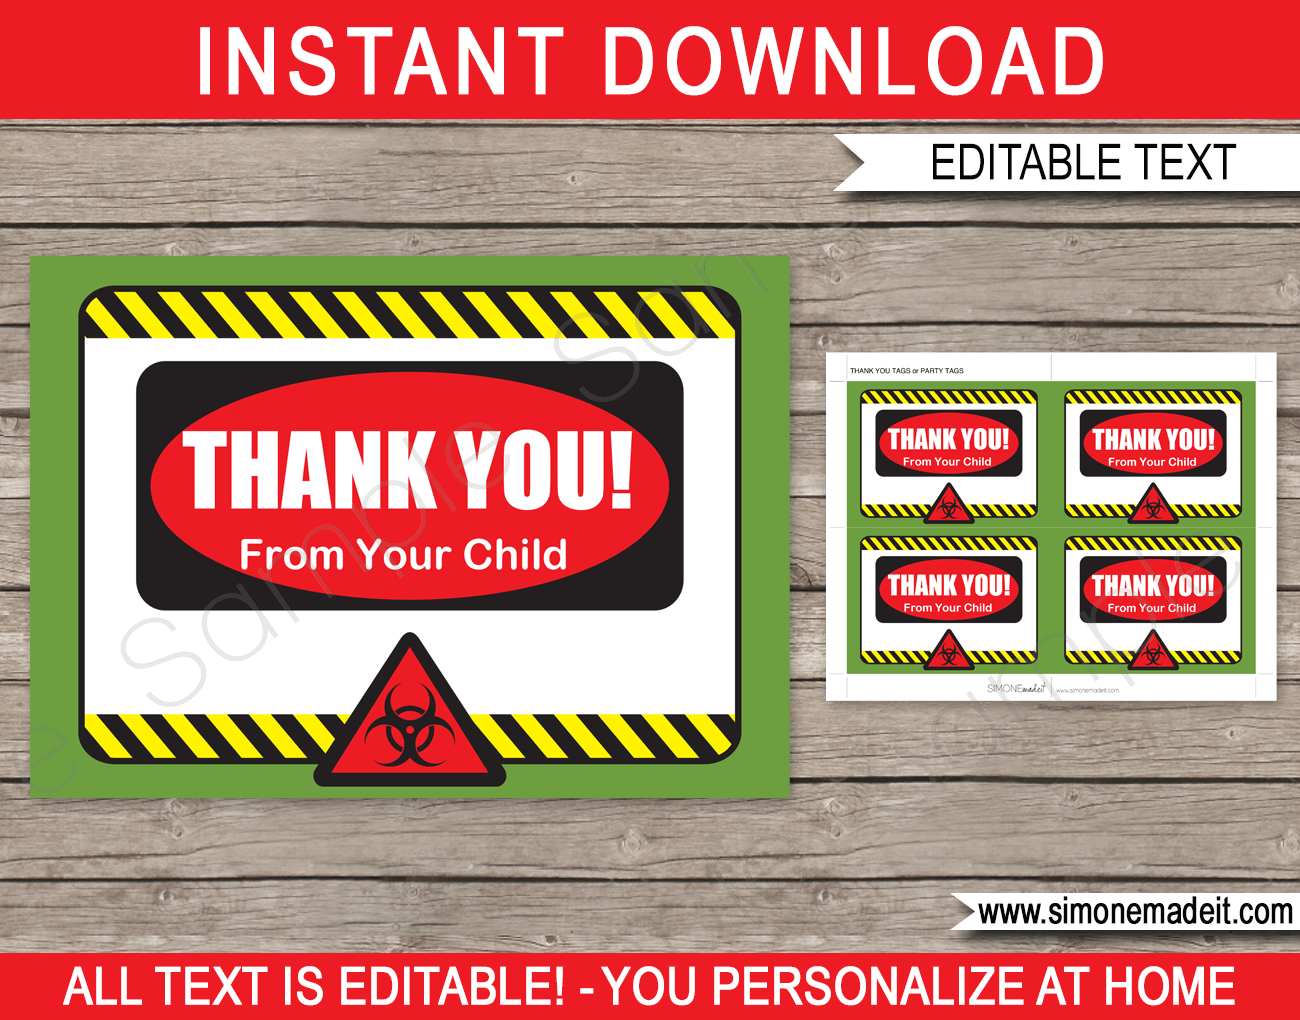 Mad Science Party Favor Tags | Thank You Tags | Birthday Party | Editable DIY Template | $3.00 INSTANT DOWNLOAD via SIMONEmadeit.com